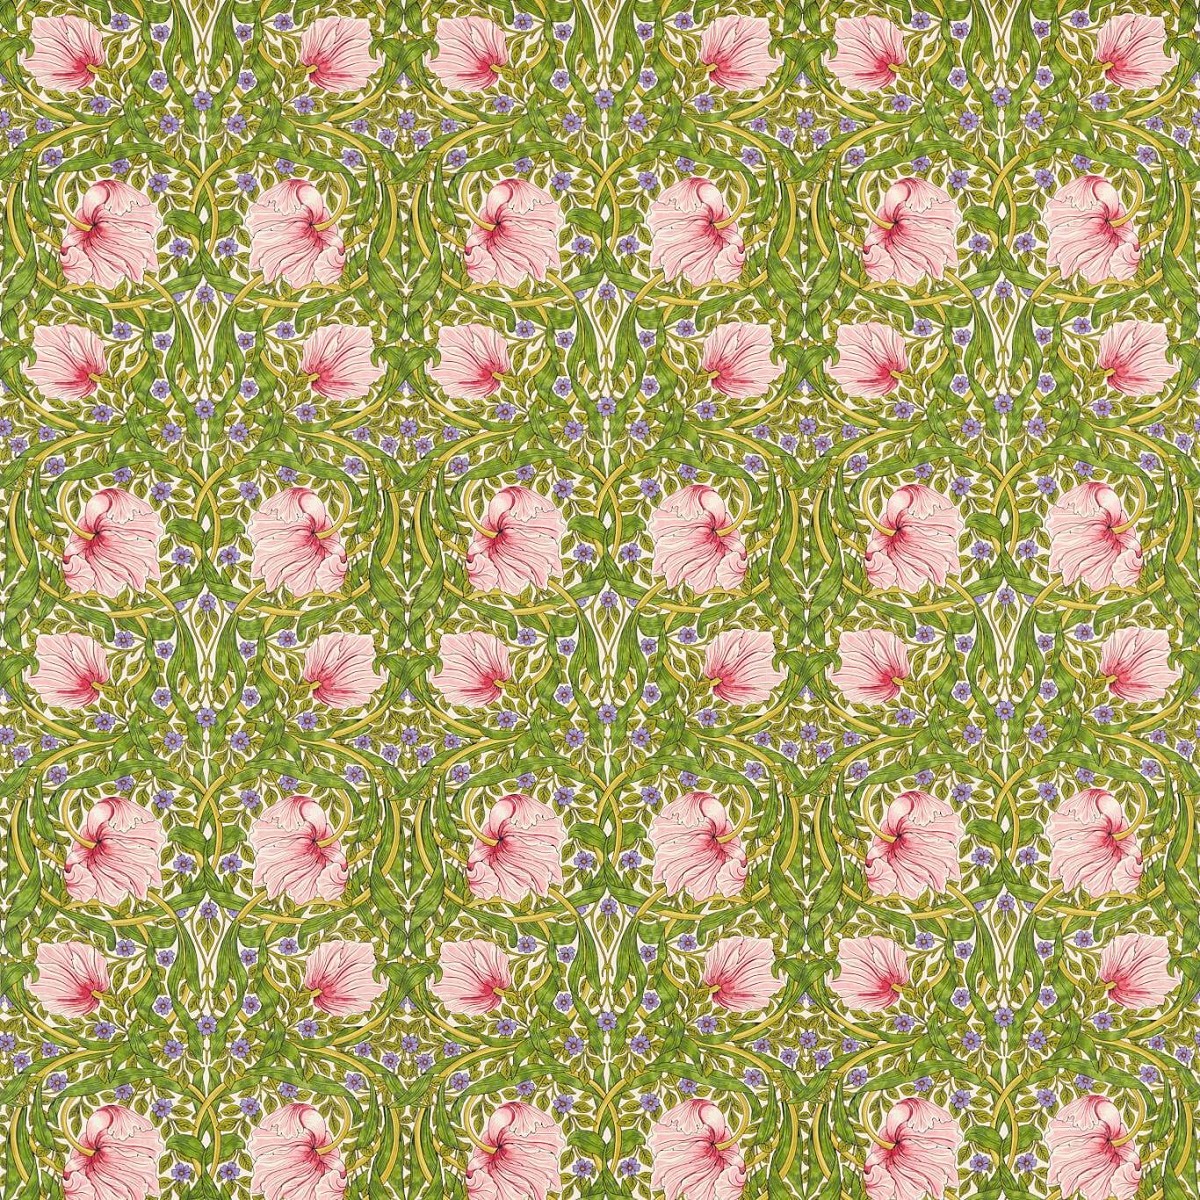 Pimpernel Sap Green/Strawberry Fabric by William Morris & Co.